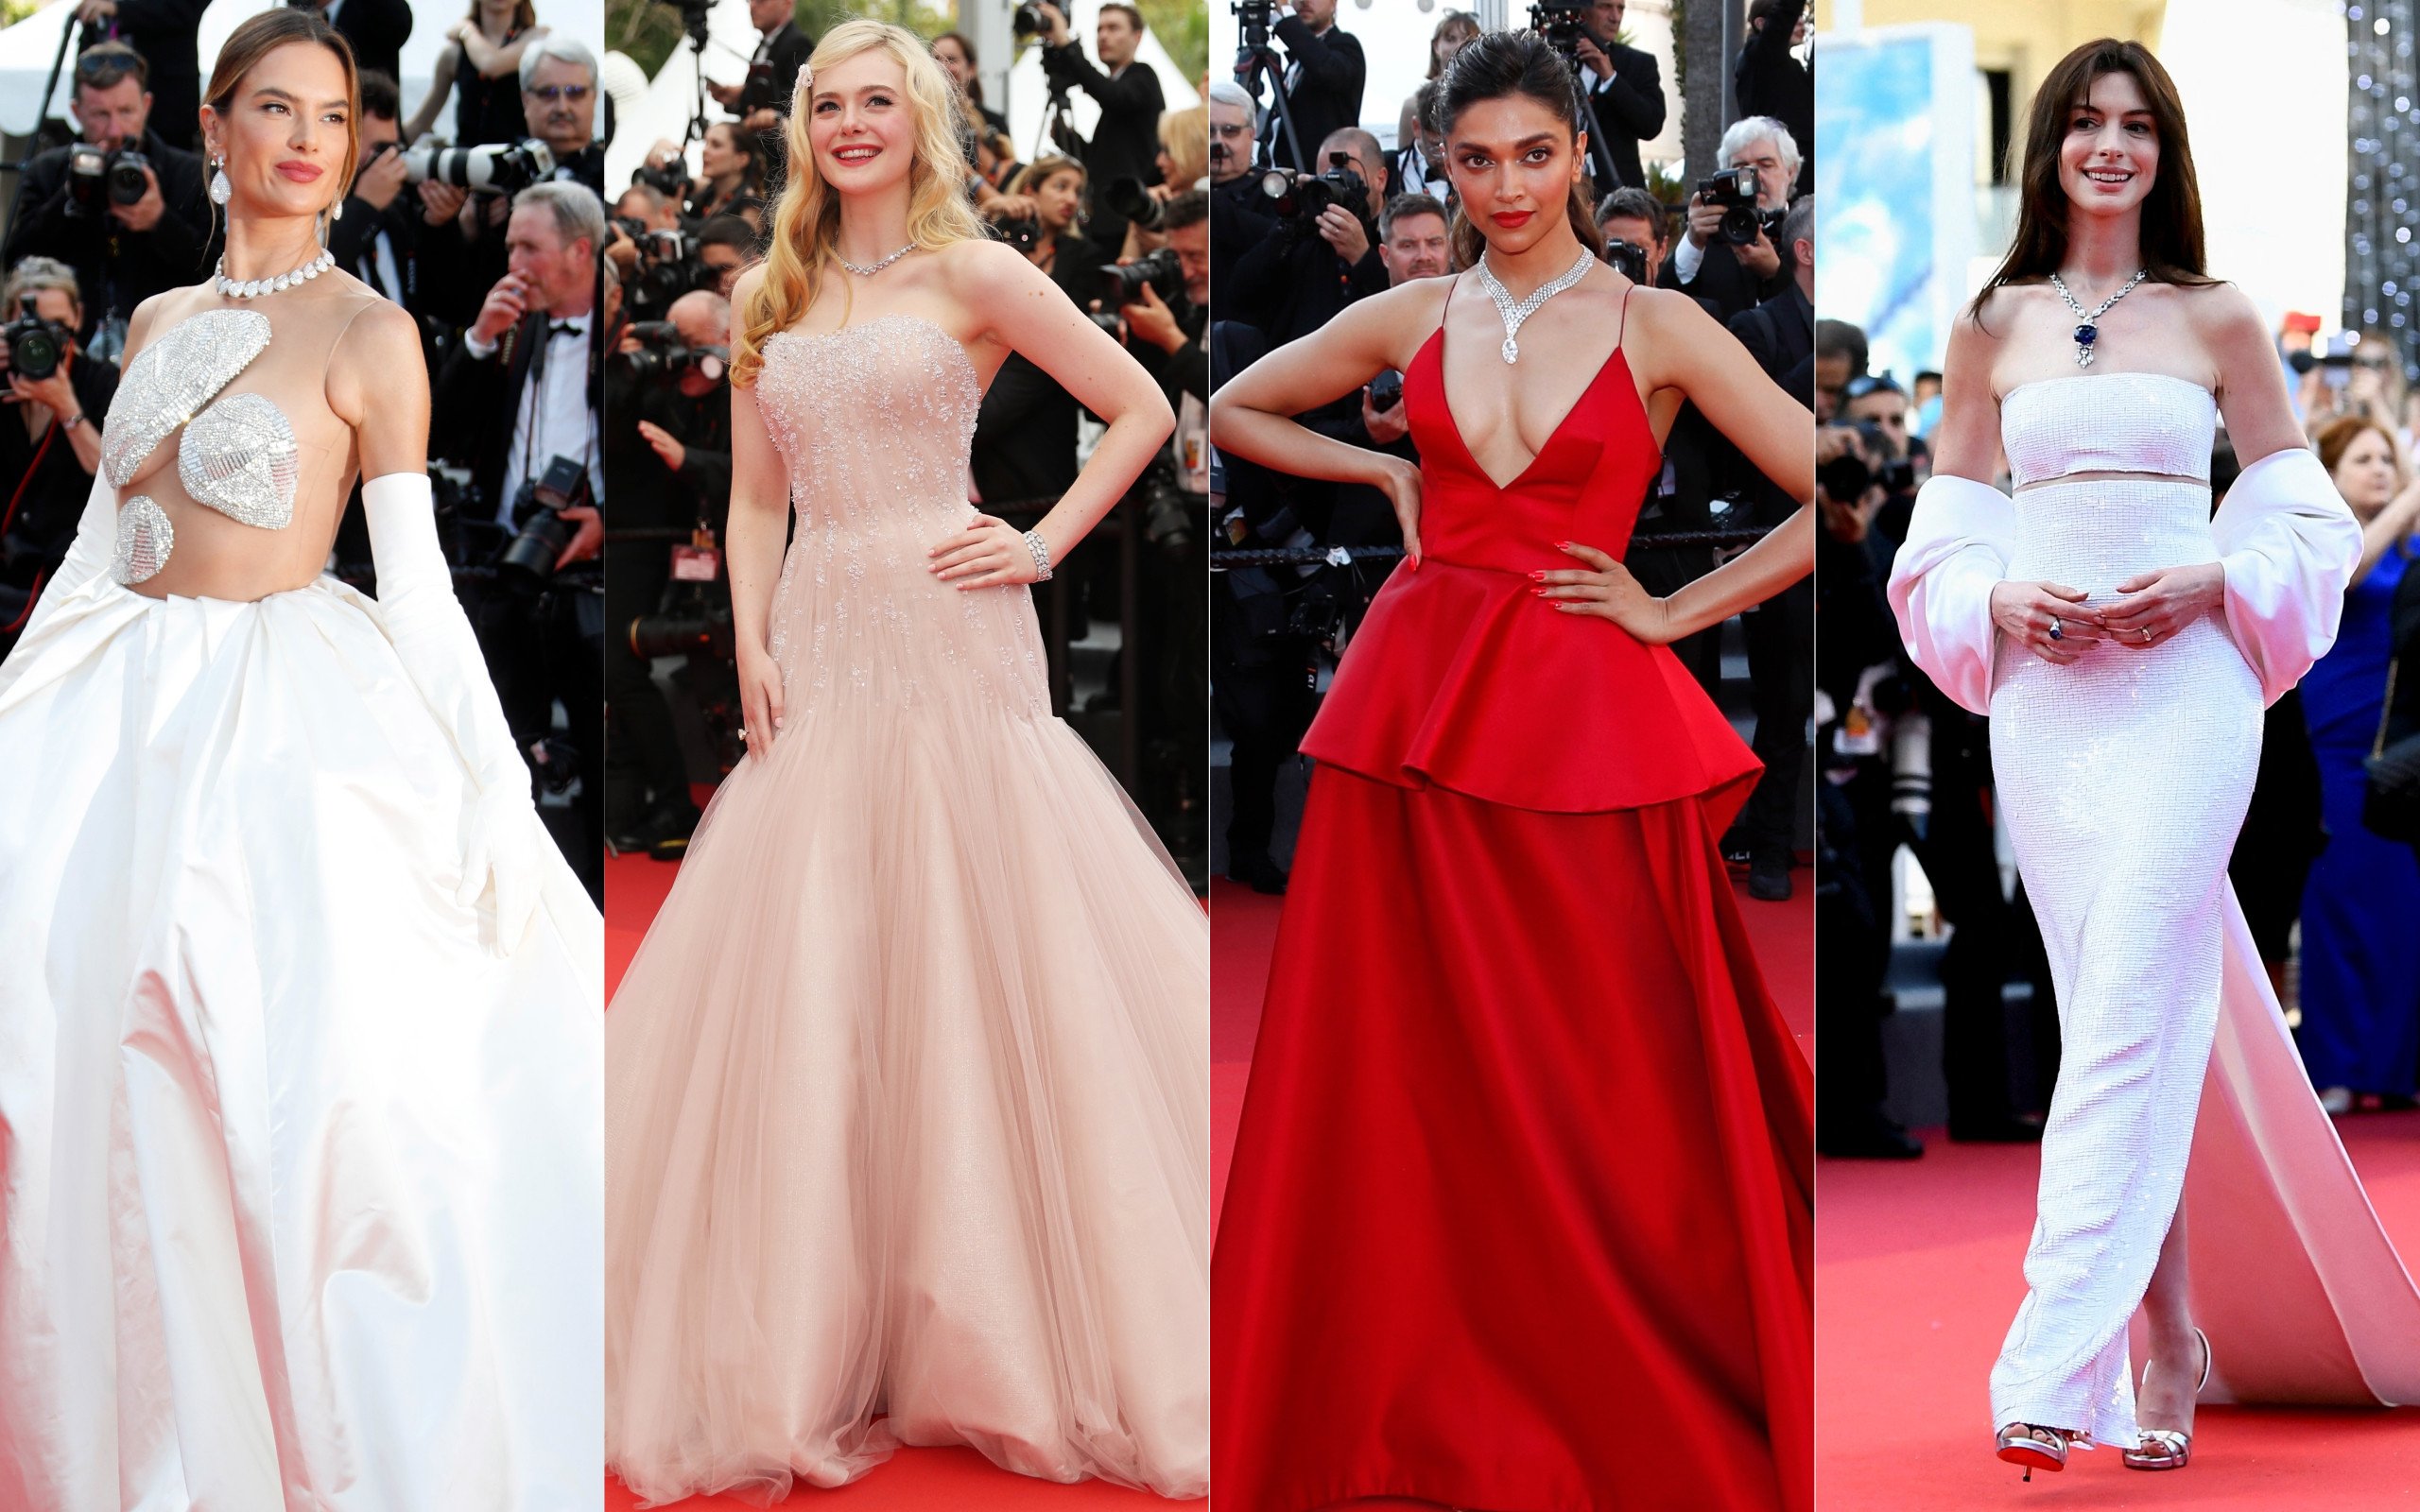 Among Alessandra Ambrosio, Elle Fanning, Deepika Padukone and Anne Hathaway, who turned up the glamour and who dialled it down at the 75th Cannes Film Festival? Photos: PA, Xinhua, EPA-EFE, Reuters